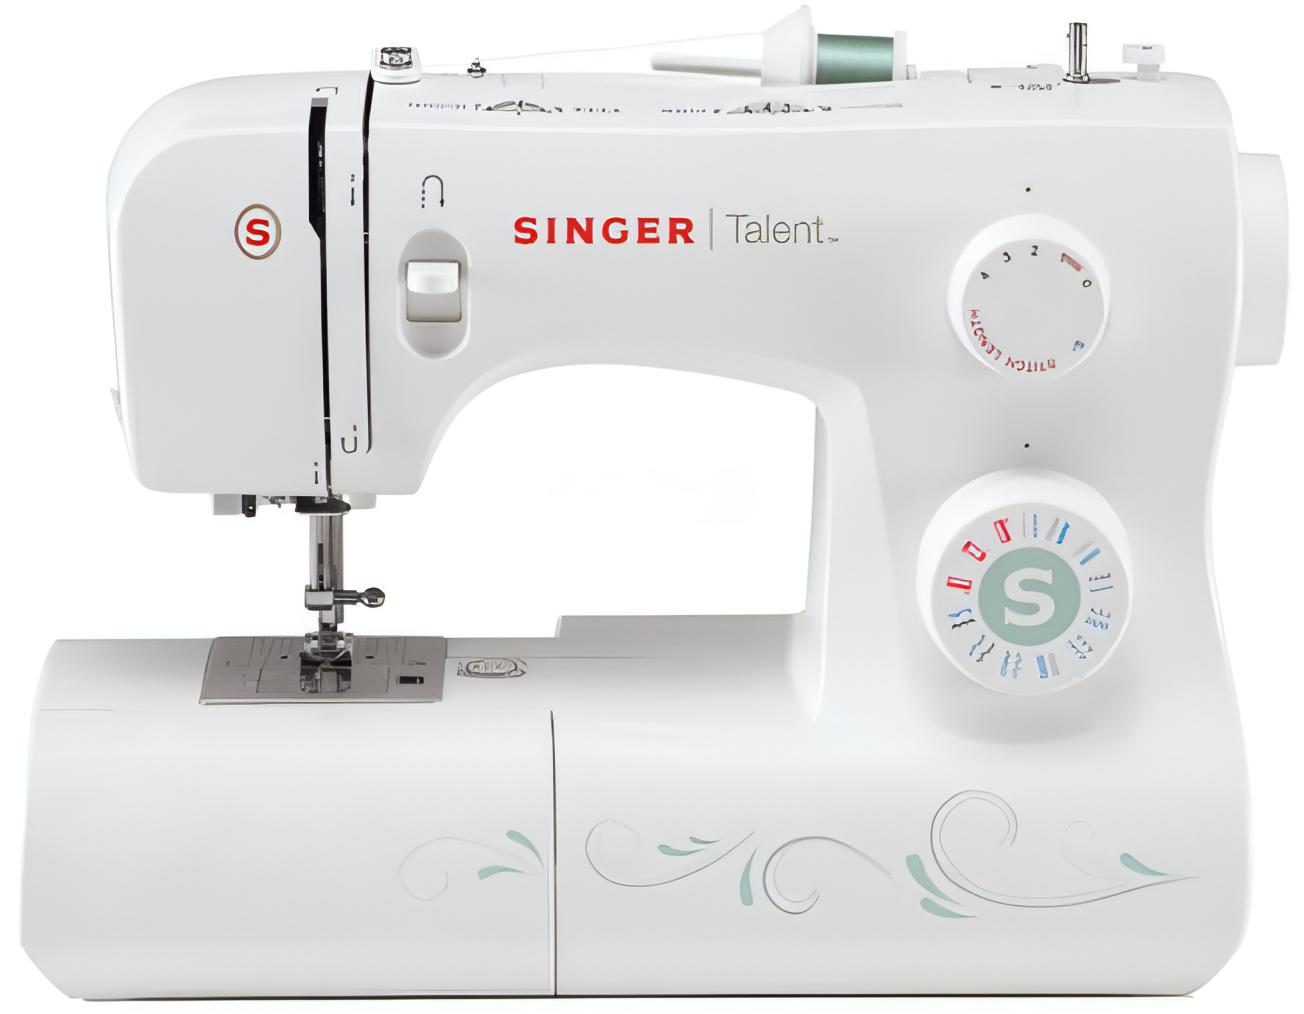 Singer Talent 3321 Sewing Machine with Drop-in Bobbin